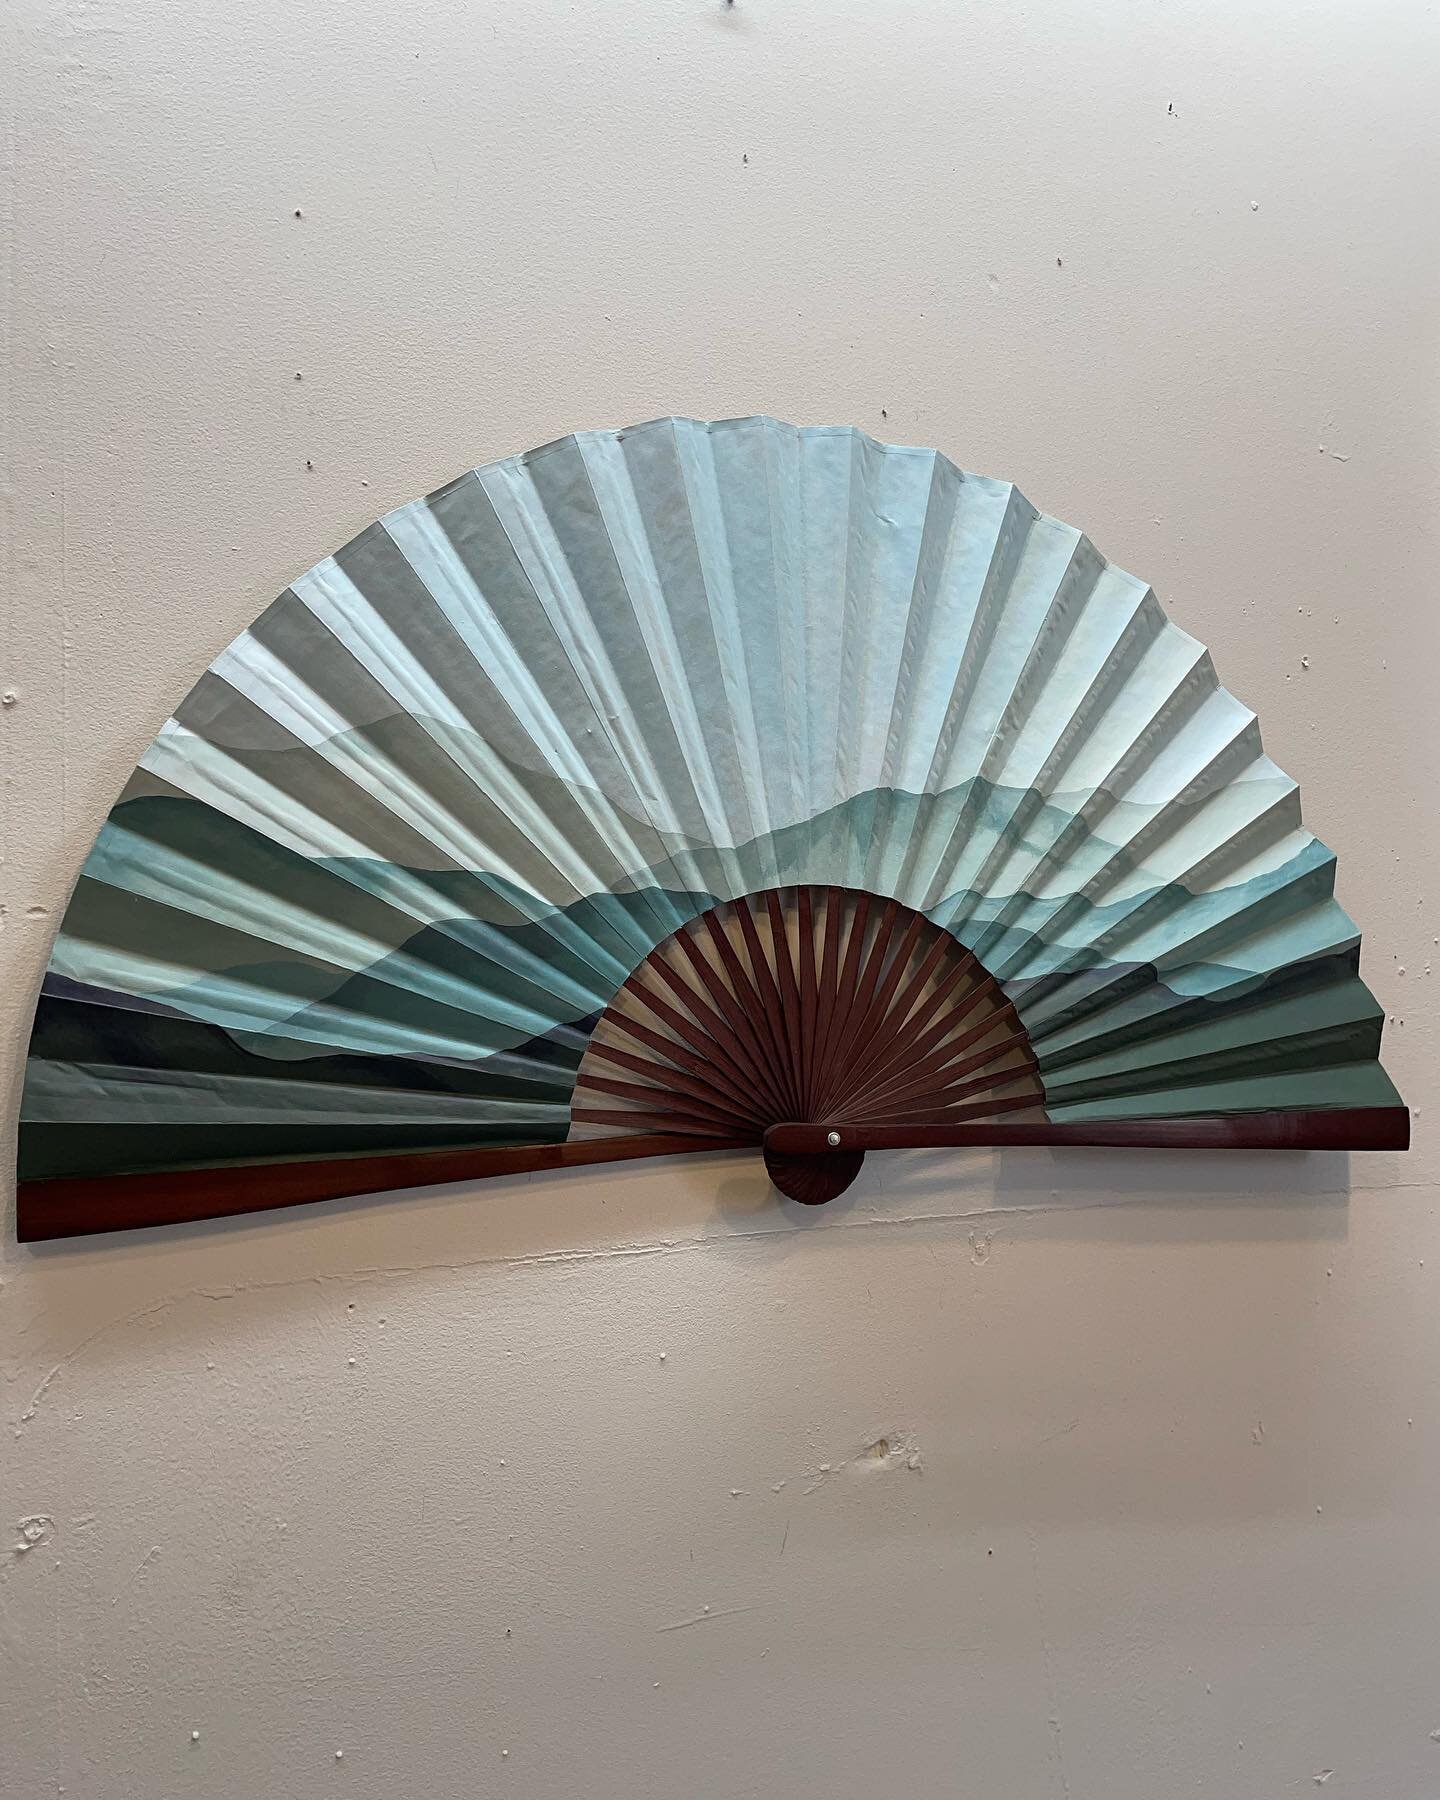 I love the shape and lines of folding fans! It shows up a lot in my work so of course I&rsquo;m drawn to paint on actual folding fans. This one is 3&rsquo; across and available.. 
I also have a blank one that I&rsquo;m going to start on soon!